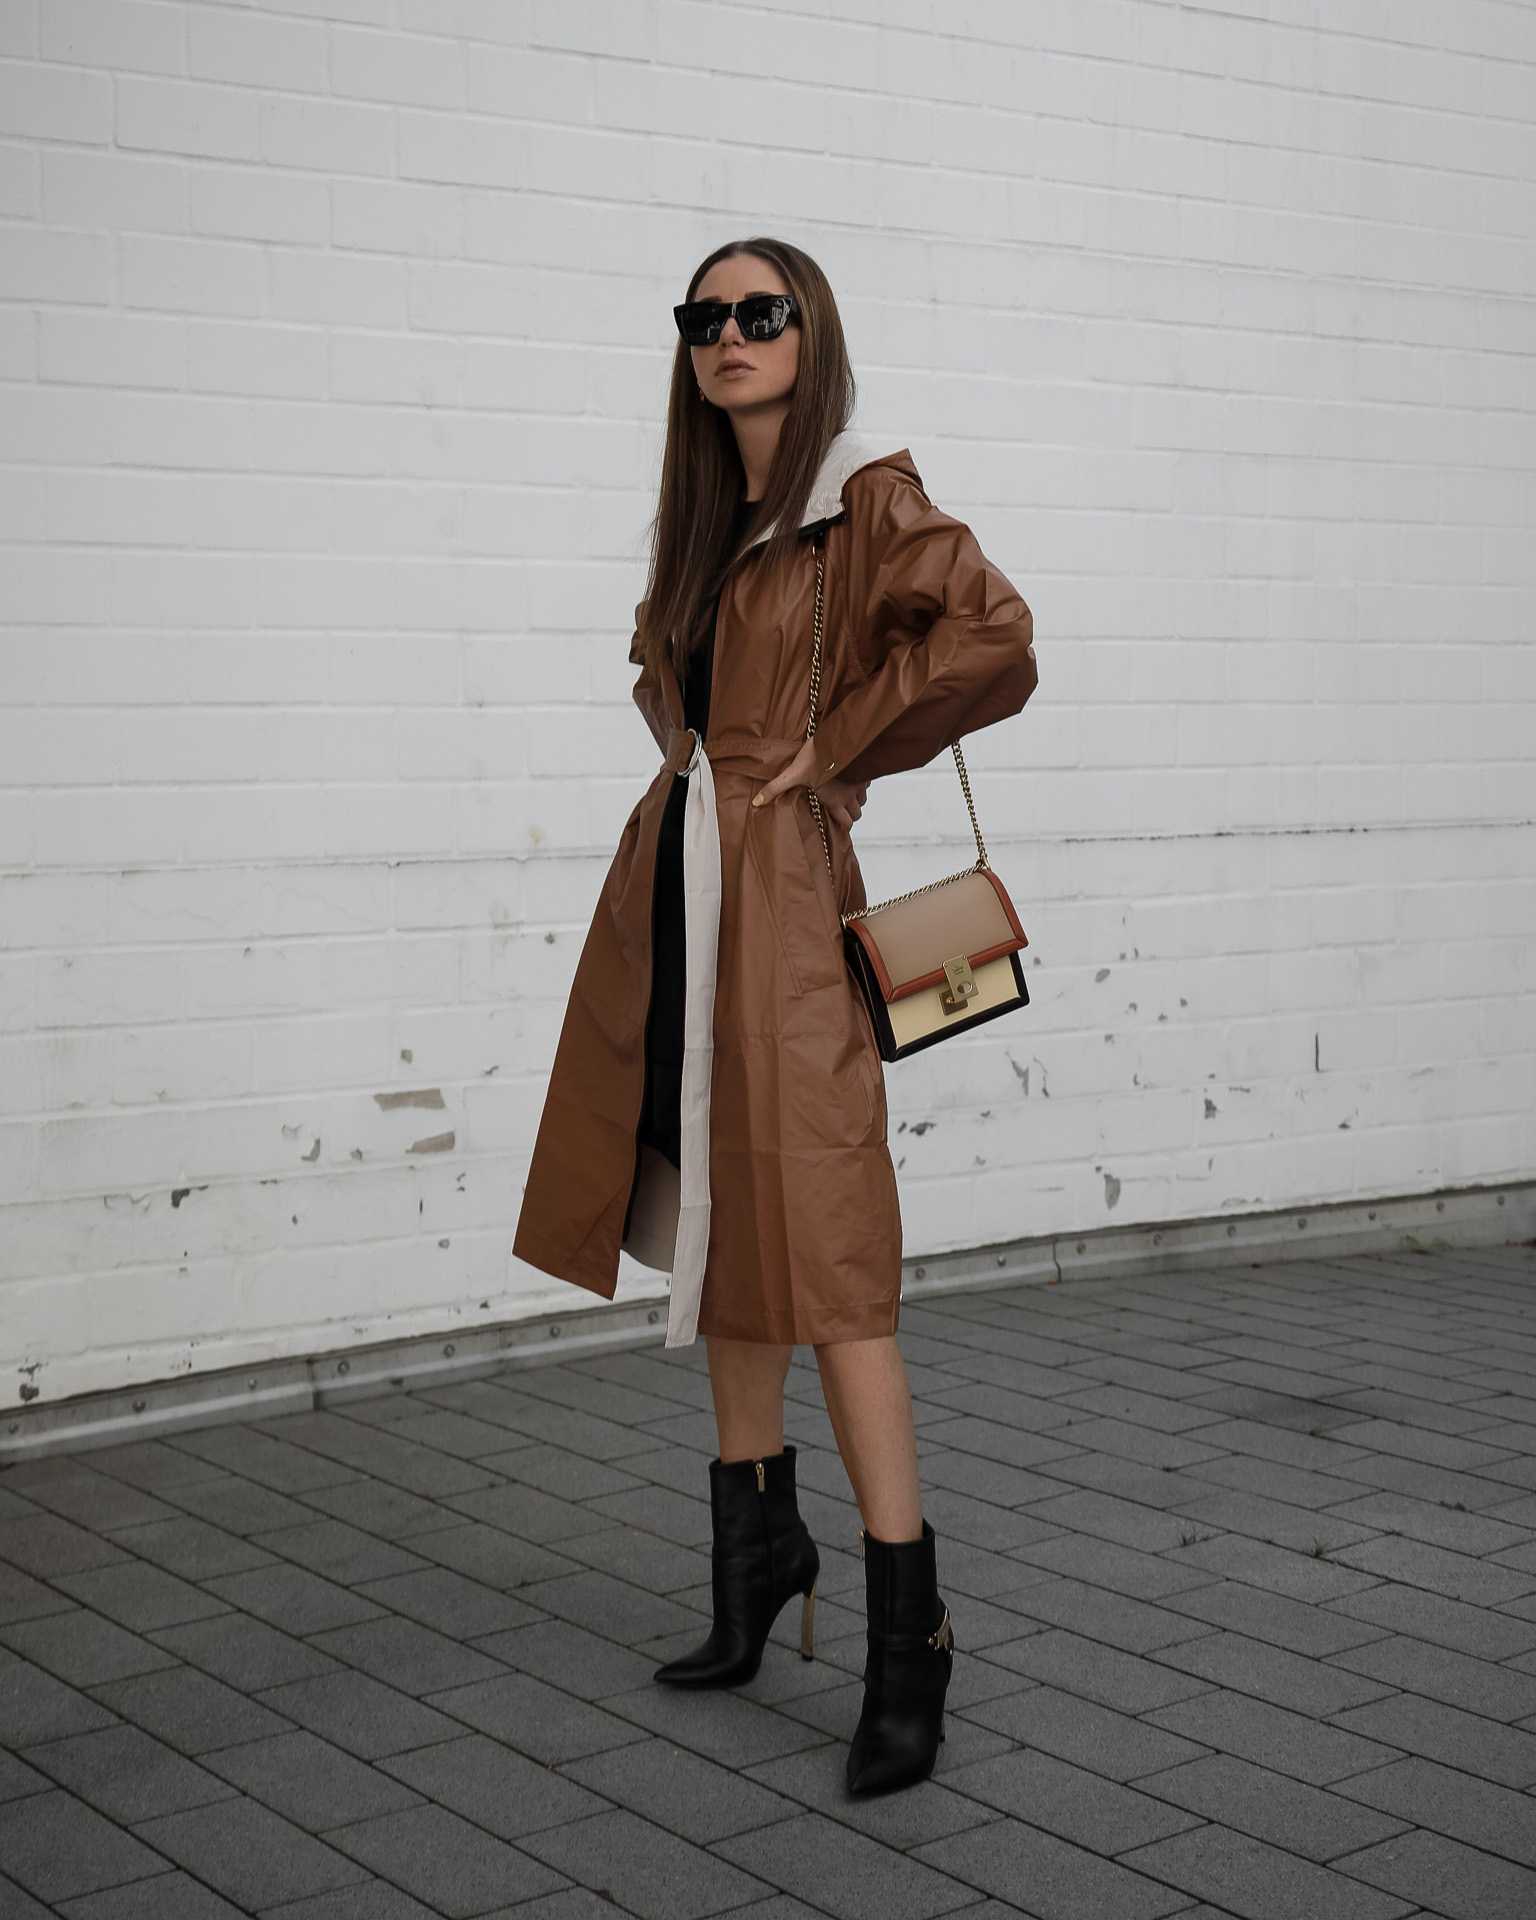 Herbst Outfit Inspiration: Neutrale Farben / Blogger Herbsttrends 2020